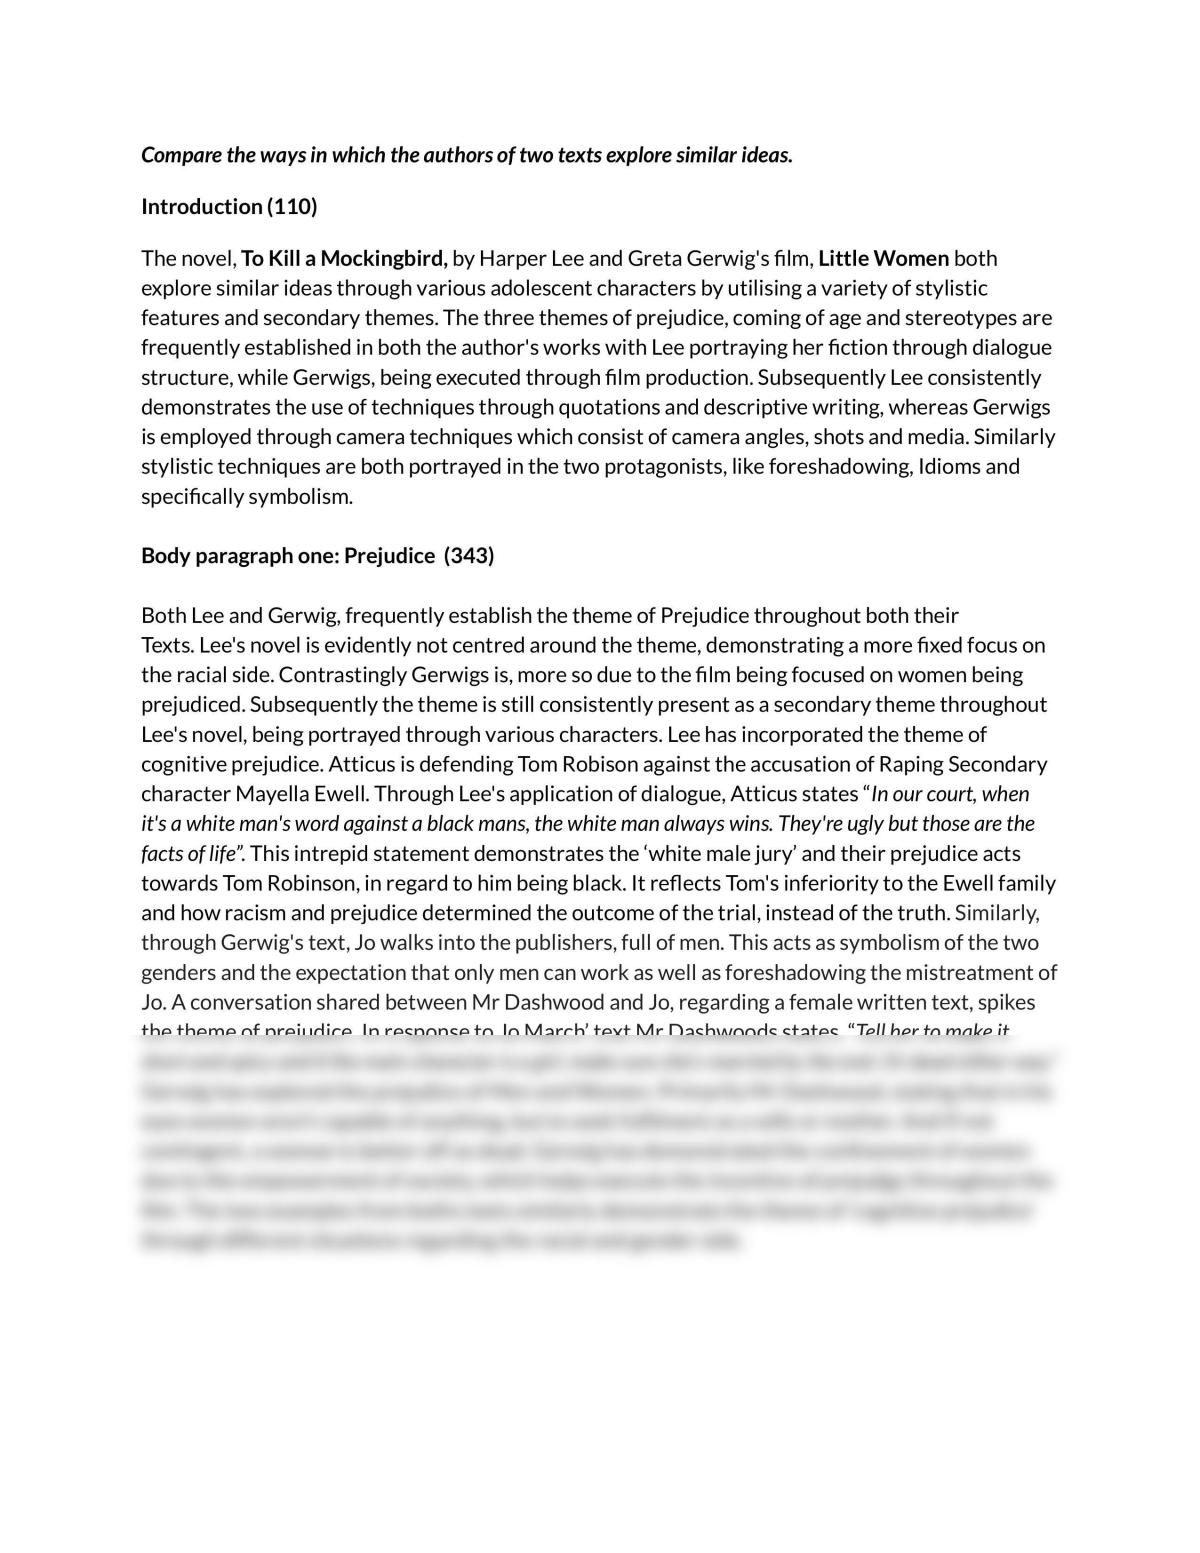 Intertextual study: comparison of To Kill a mockingbird and Little women - Page 1